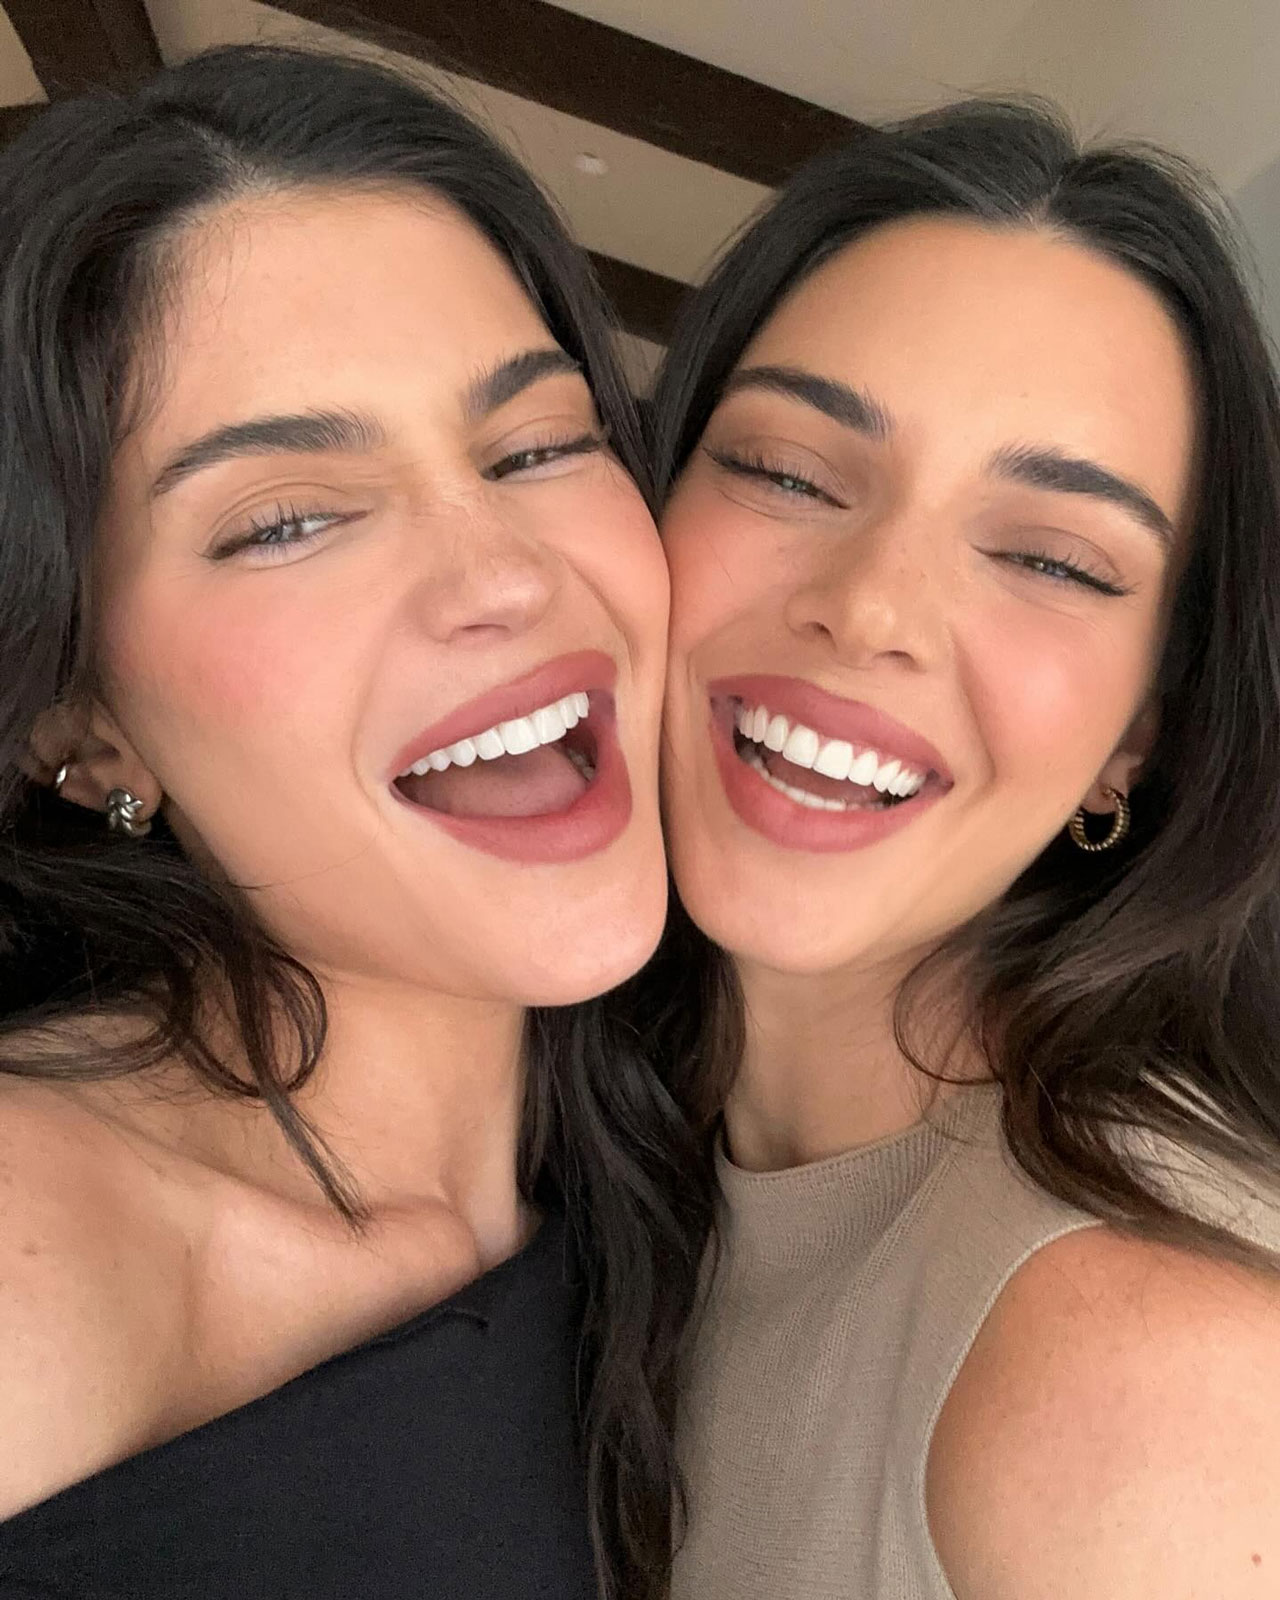 Fans Think Kylie And Kendall Jenner Are Looking More Alike After Their  Recent Selfie: 'Same Fillers, Same Botox' - SHEfinds